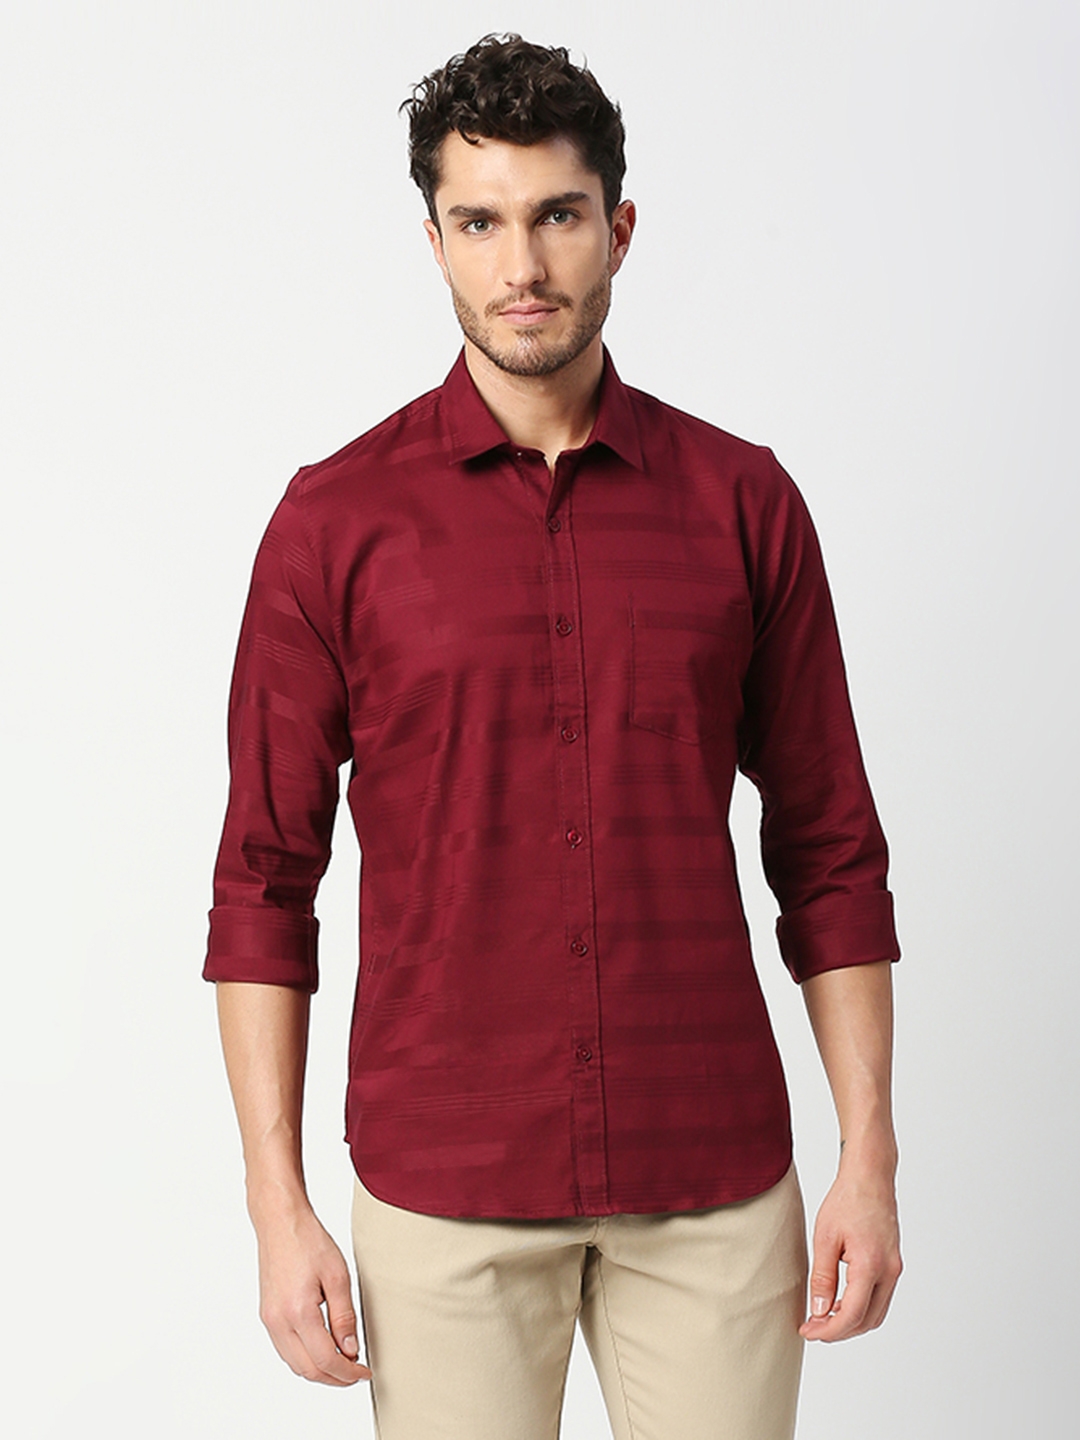 Solemio Cotton Spandex Slim Fit Striped Casual Shirt For Mens - Maroon